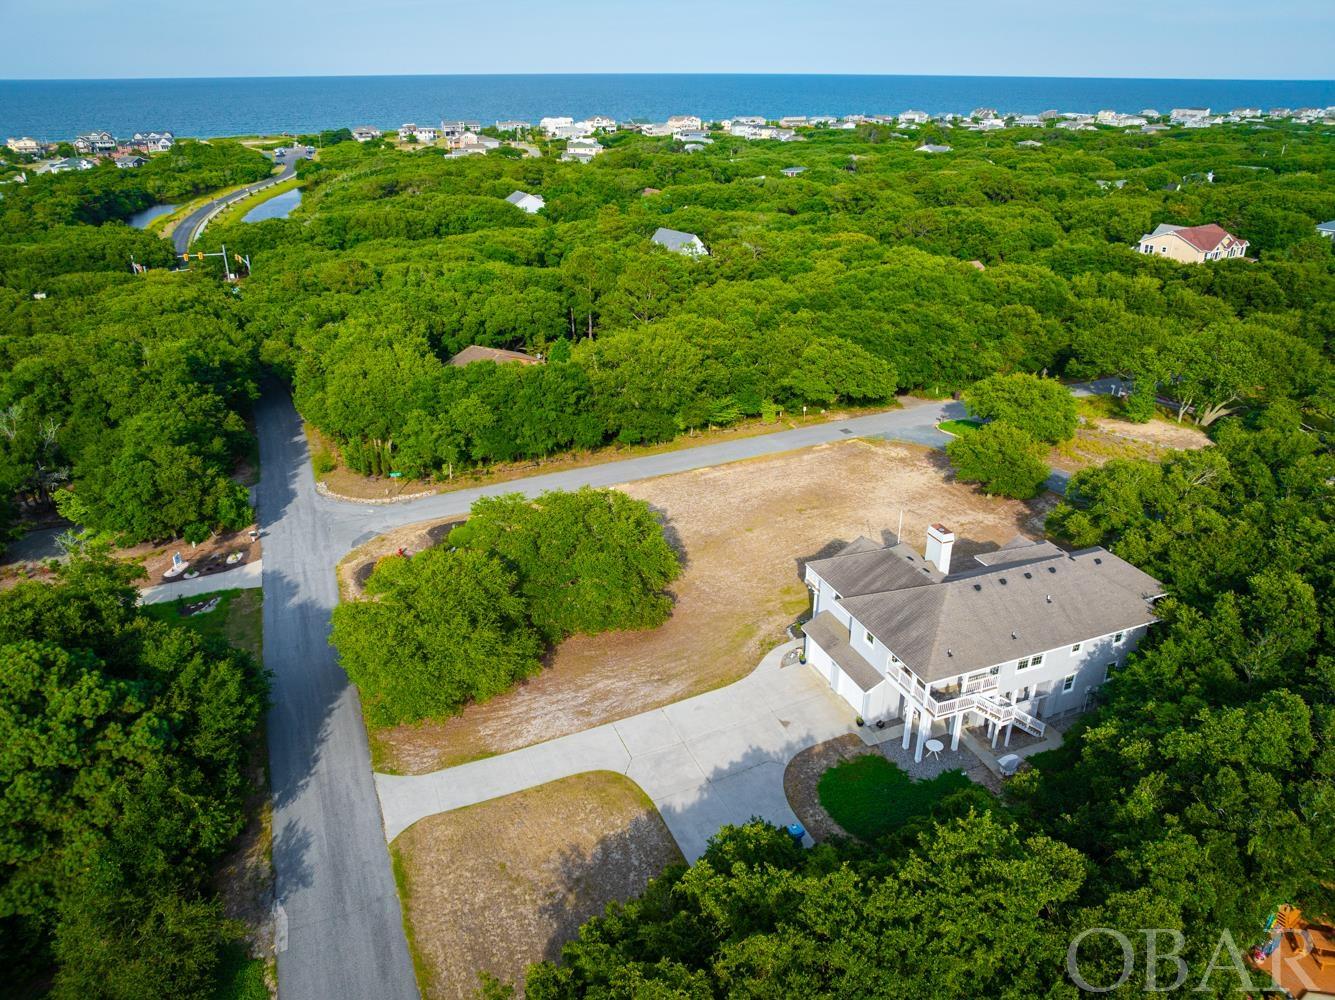 327 Wax Myrtle Trail, Southern Shores, NC 27949, 4 Bedrooms Bedrooms, ,3 BathroomsBathrooms,Residential,For sale,Wax Myrtle Trail,126055